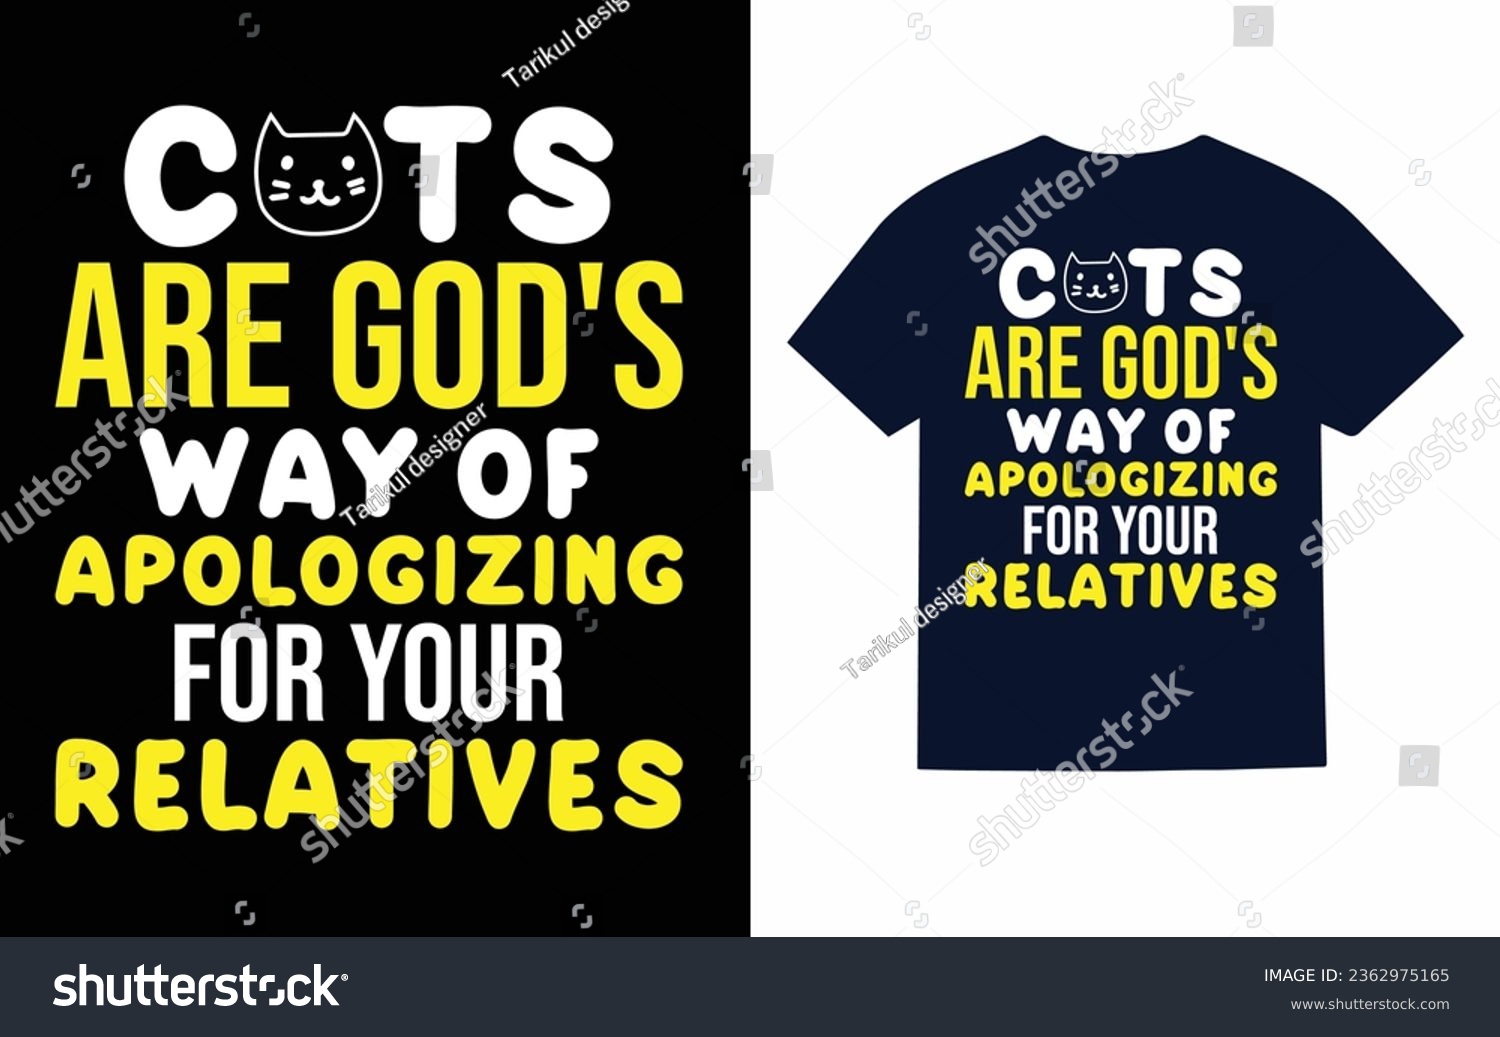 SVG of 
Cats are god's way of apologizing for your relatives, Cat t shirt design svg